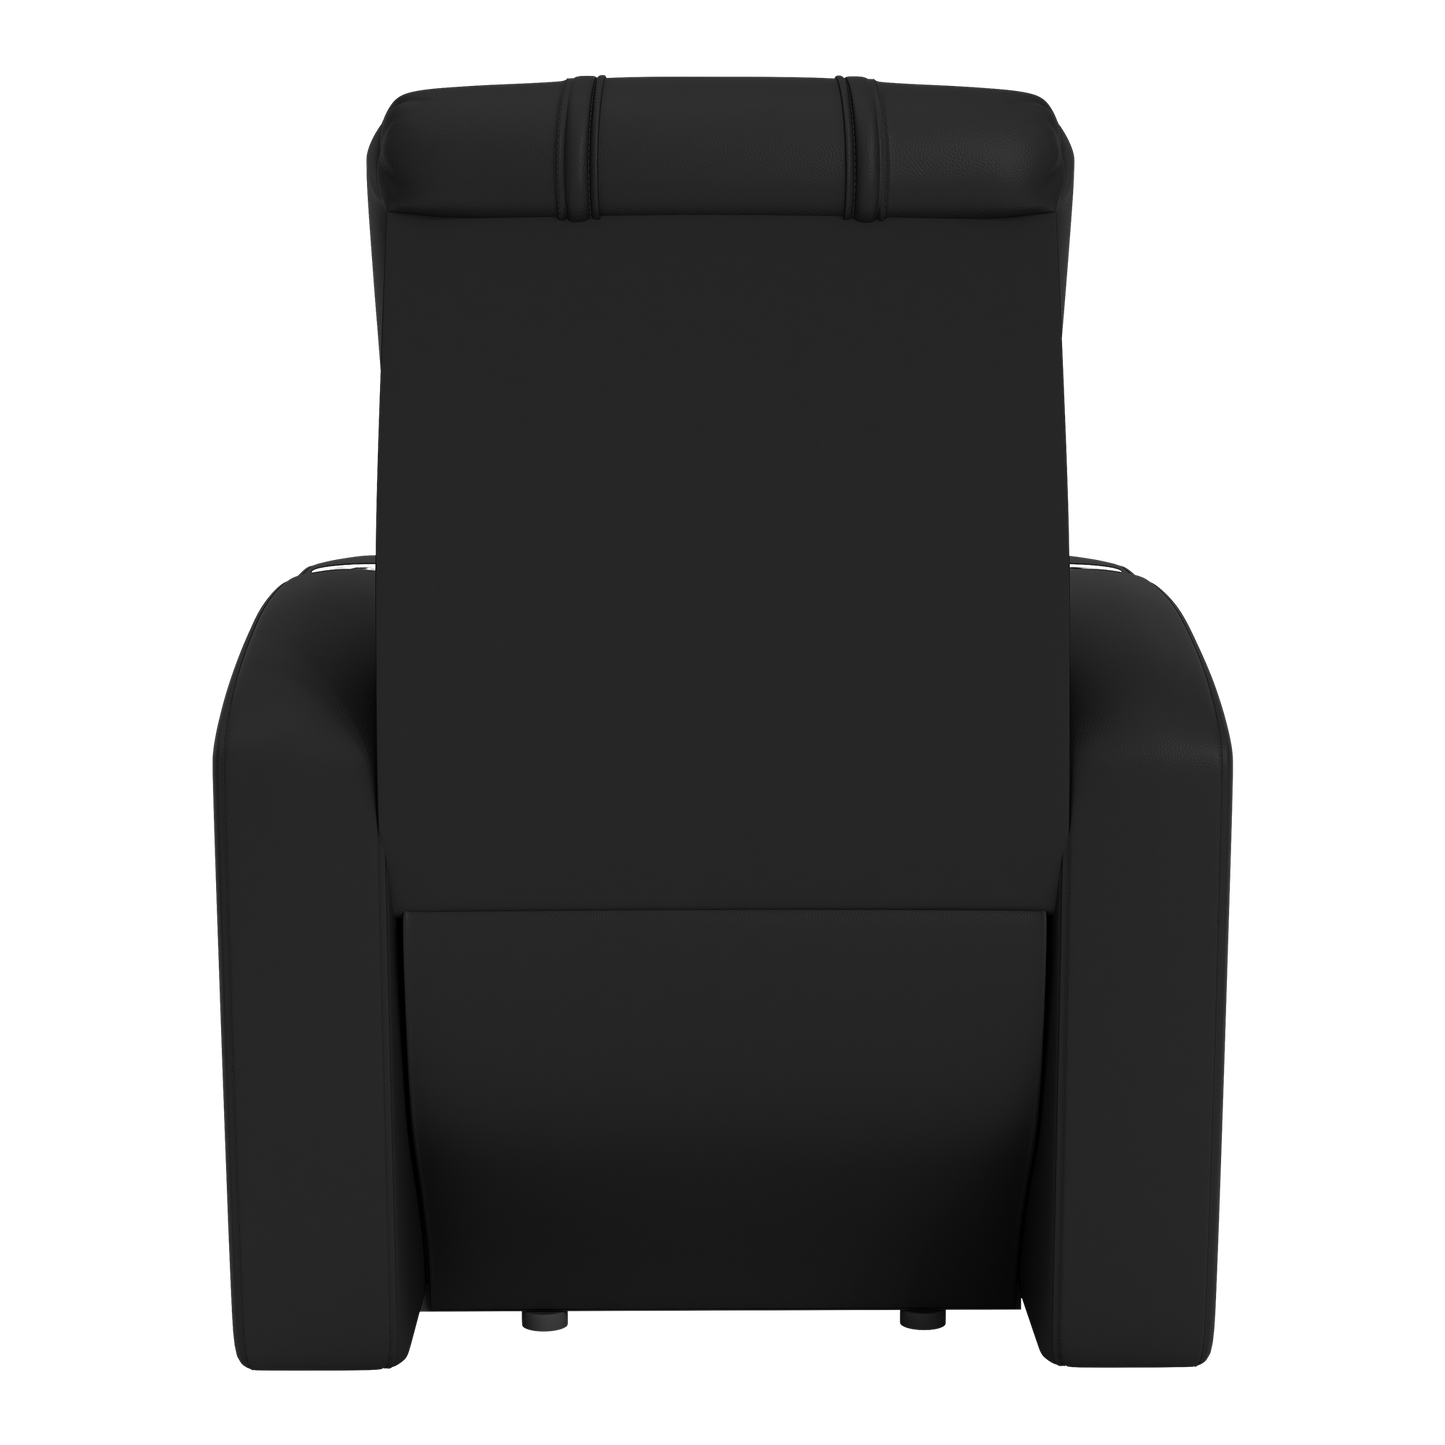 Stealth Recliner with Philadelphia 76ers GC All White [CAN ONLY BE SHIPPED TO PENNSYLVANIA]